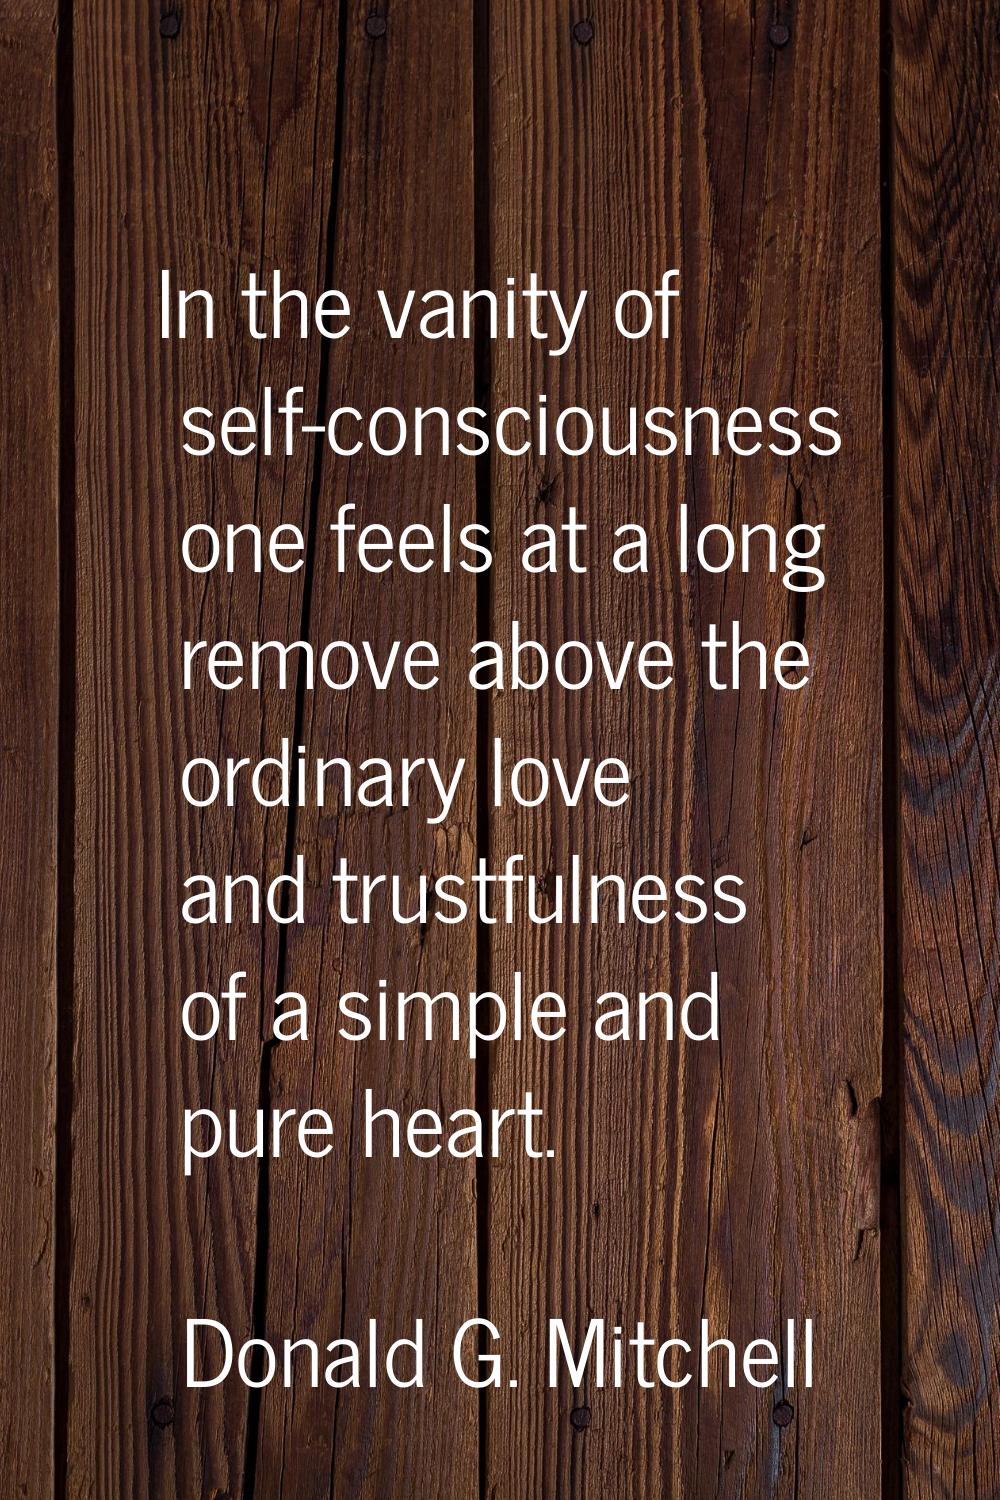 In the vanity of self-consciousness one feels at a long remove above the ordinary love and trustful